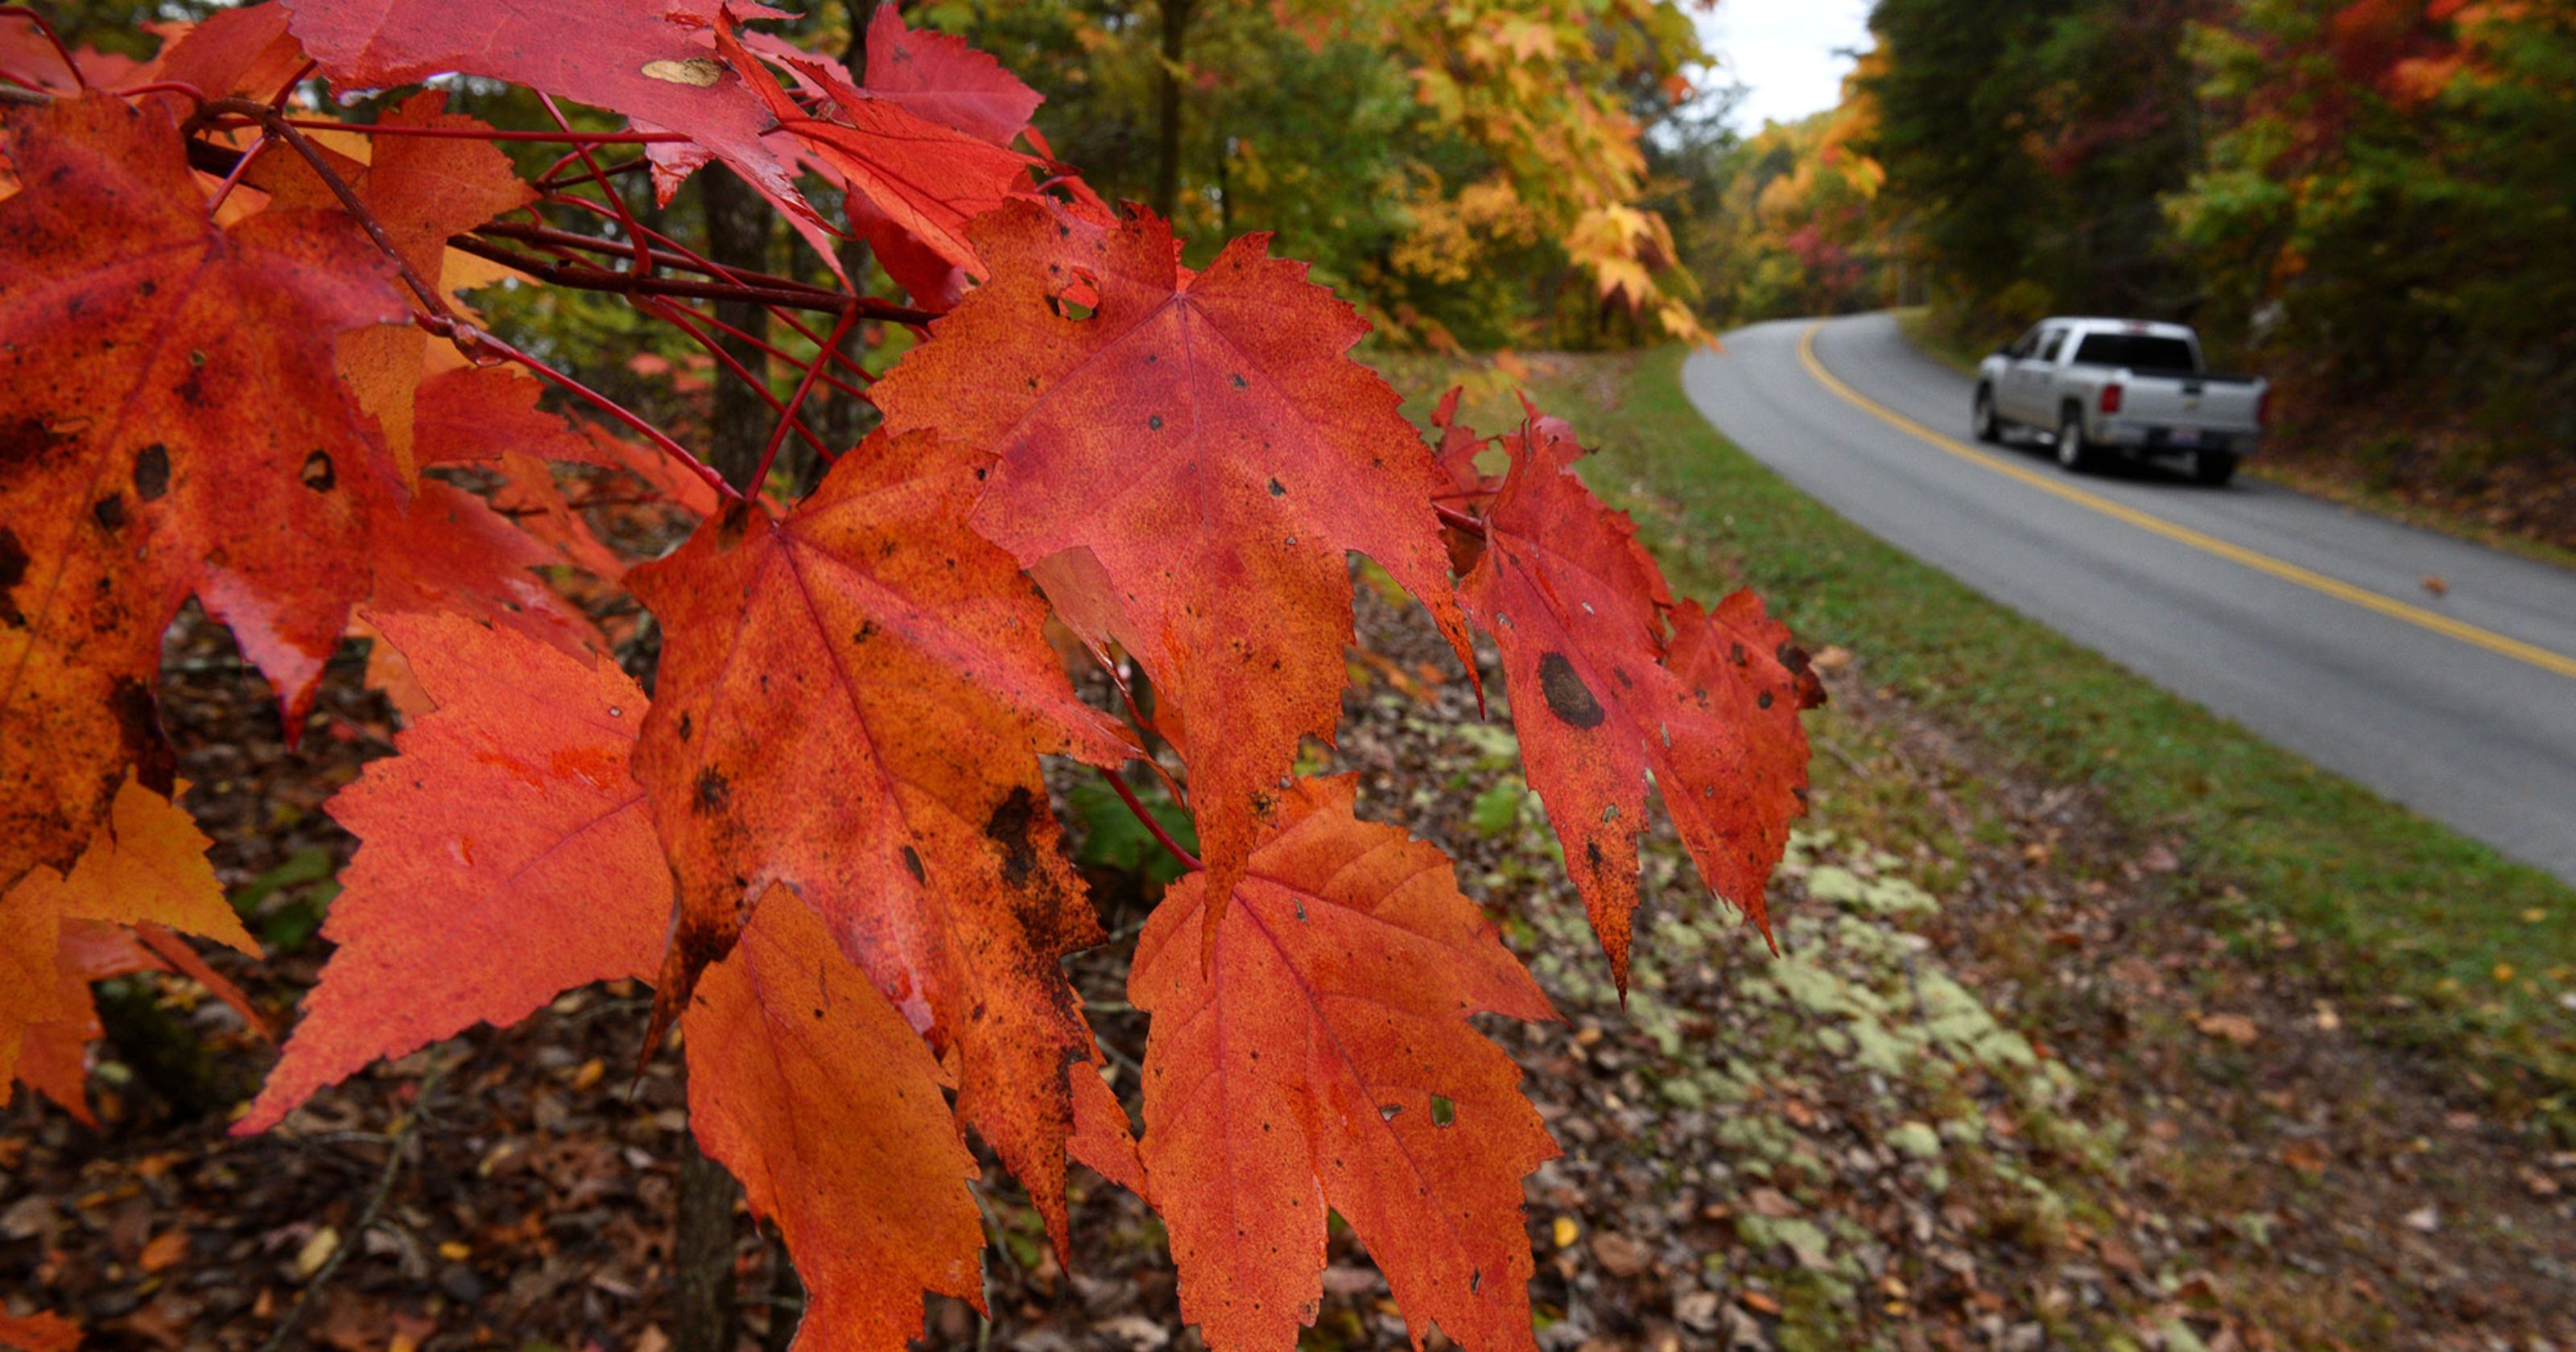 Fall foliage 2017: Where to look in east Tennessee